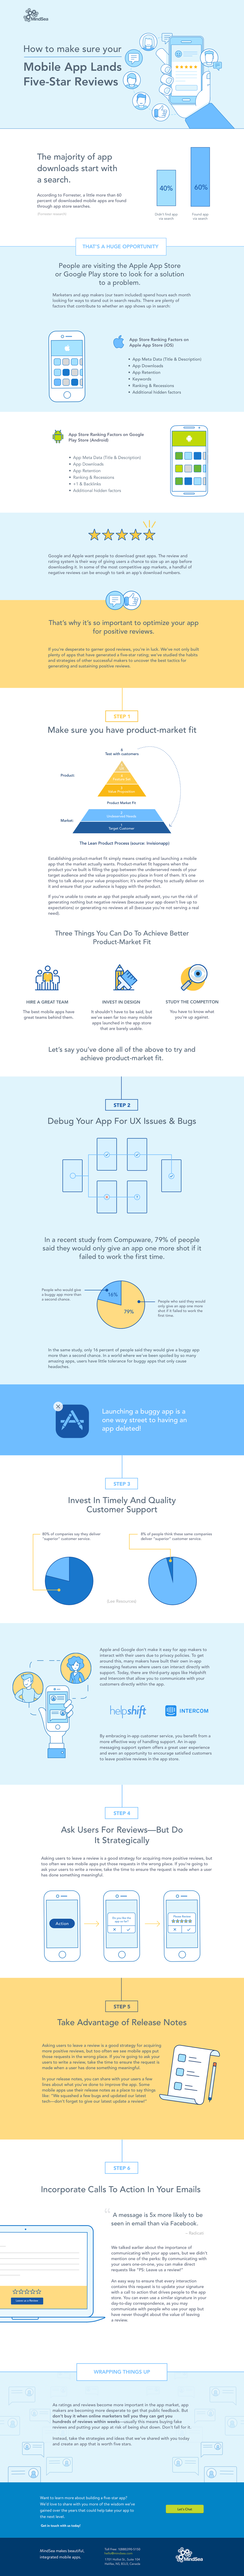 How To Make Sure Your Mobile App Land Five-Stars Reviews - #infographic